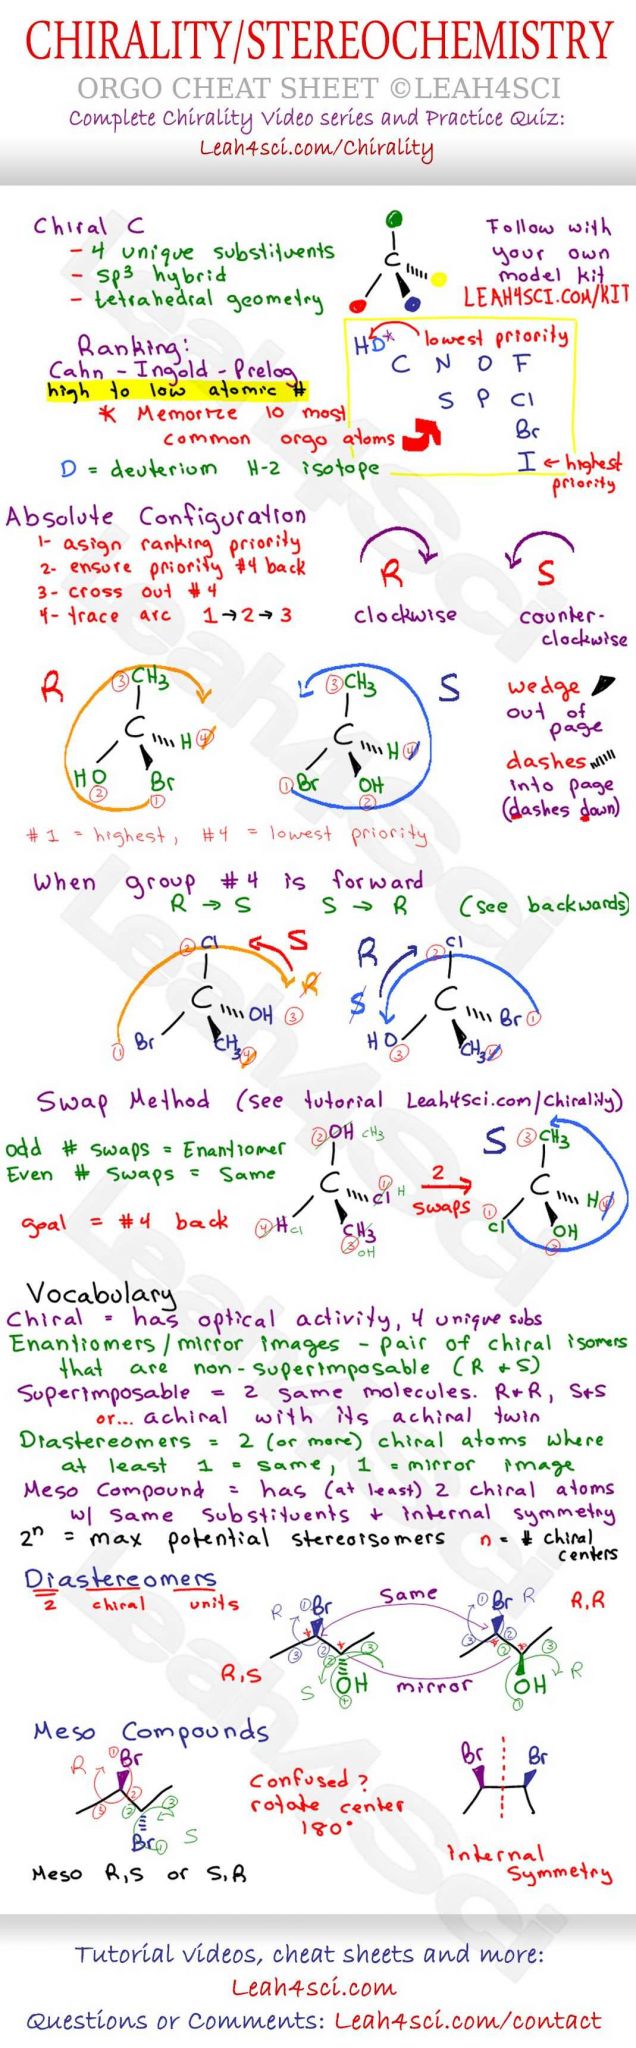 Isotopes Worksheet Answers Along with Chirality & Stereochemistry Cheat Sheet Study Guide Finding Chiral